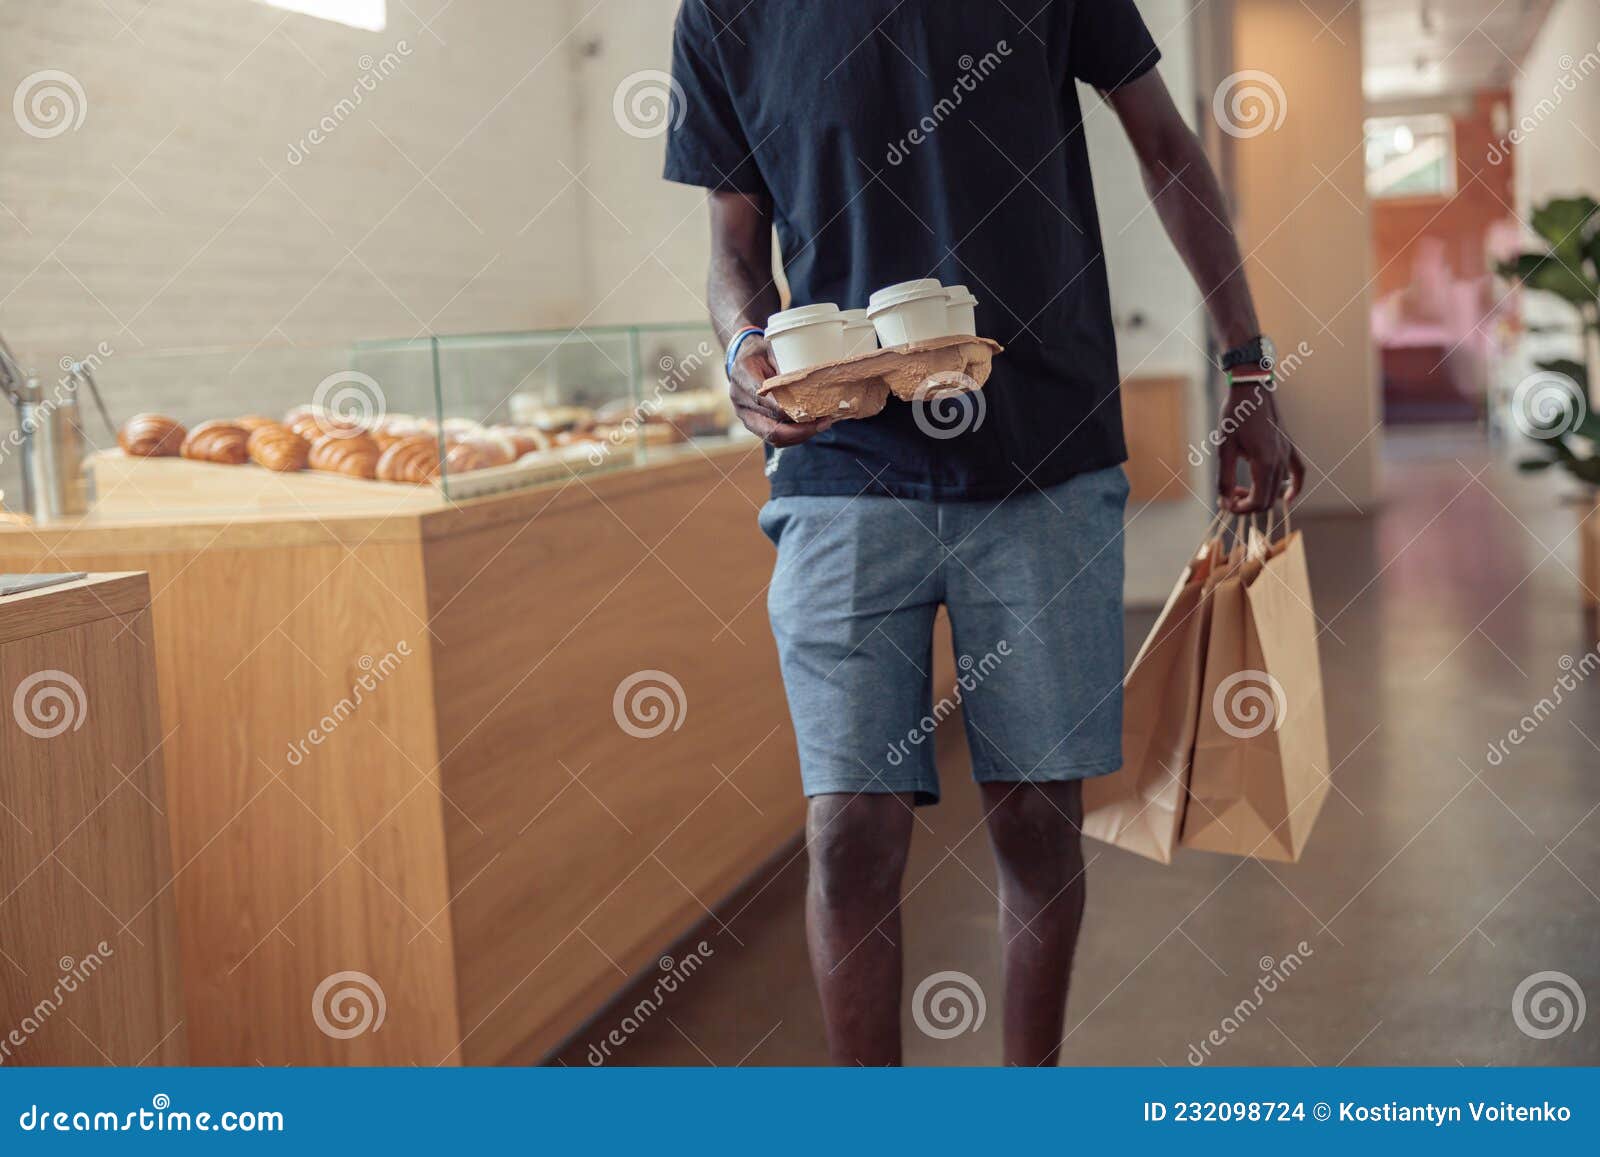 black man working deliveryman in covid-19 pandemic